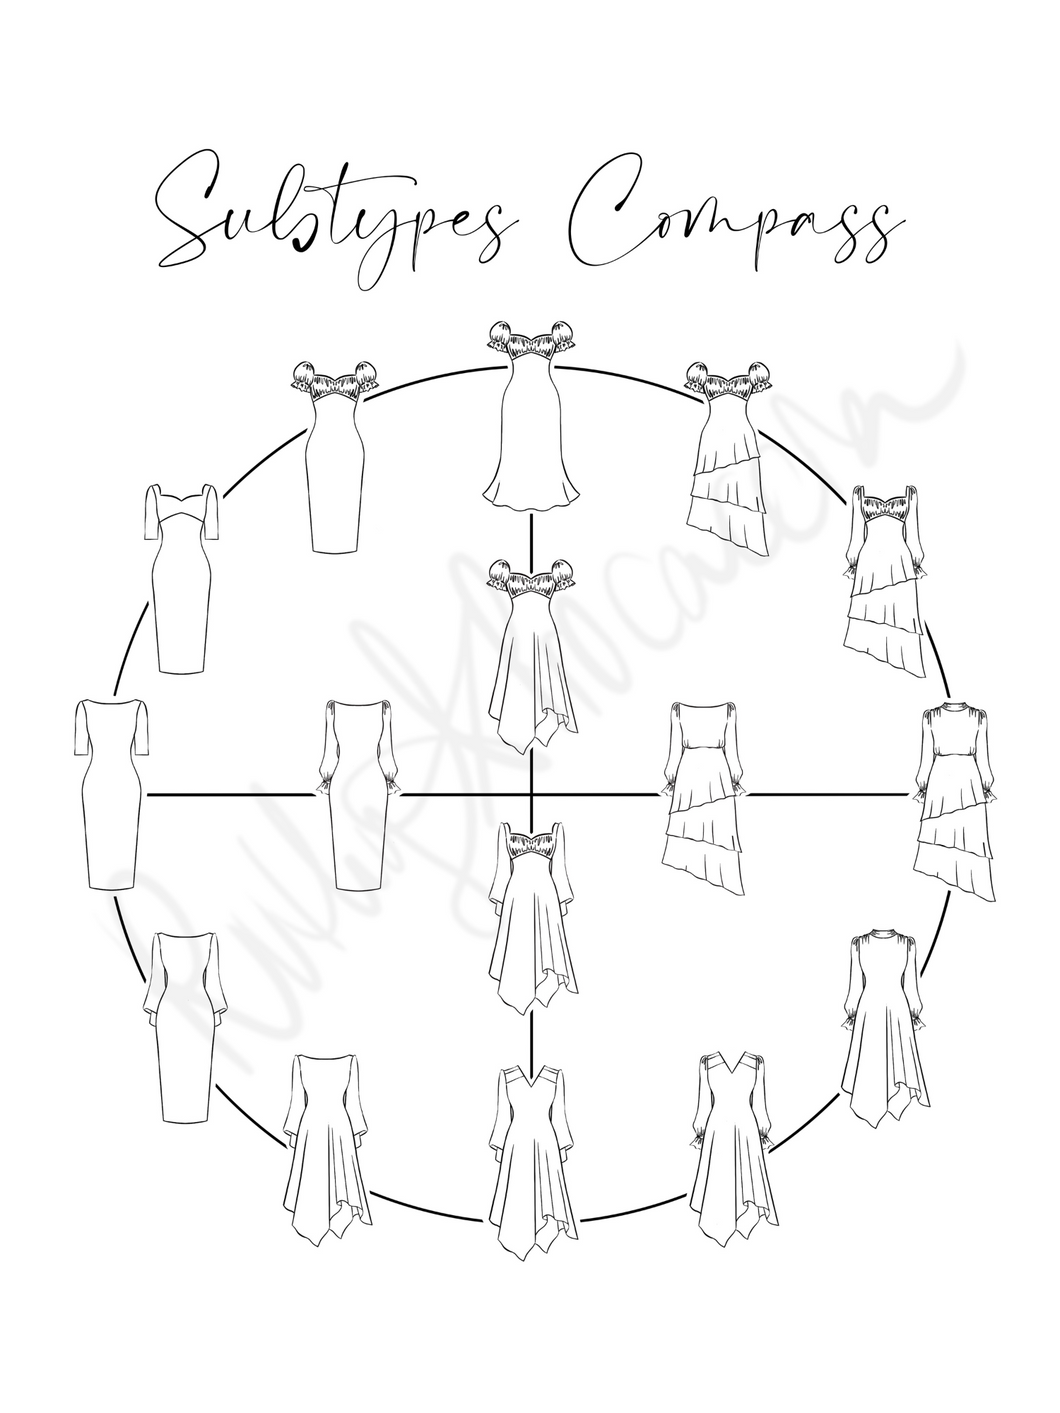 Subtypes Compass